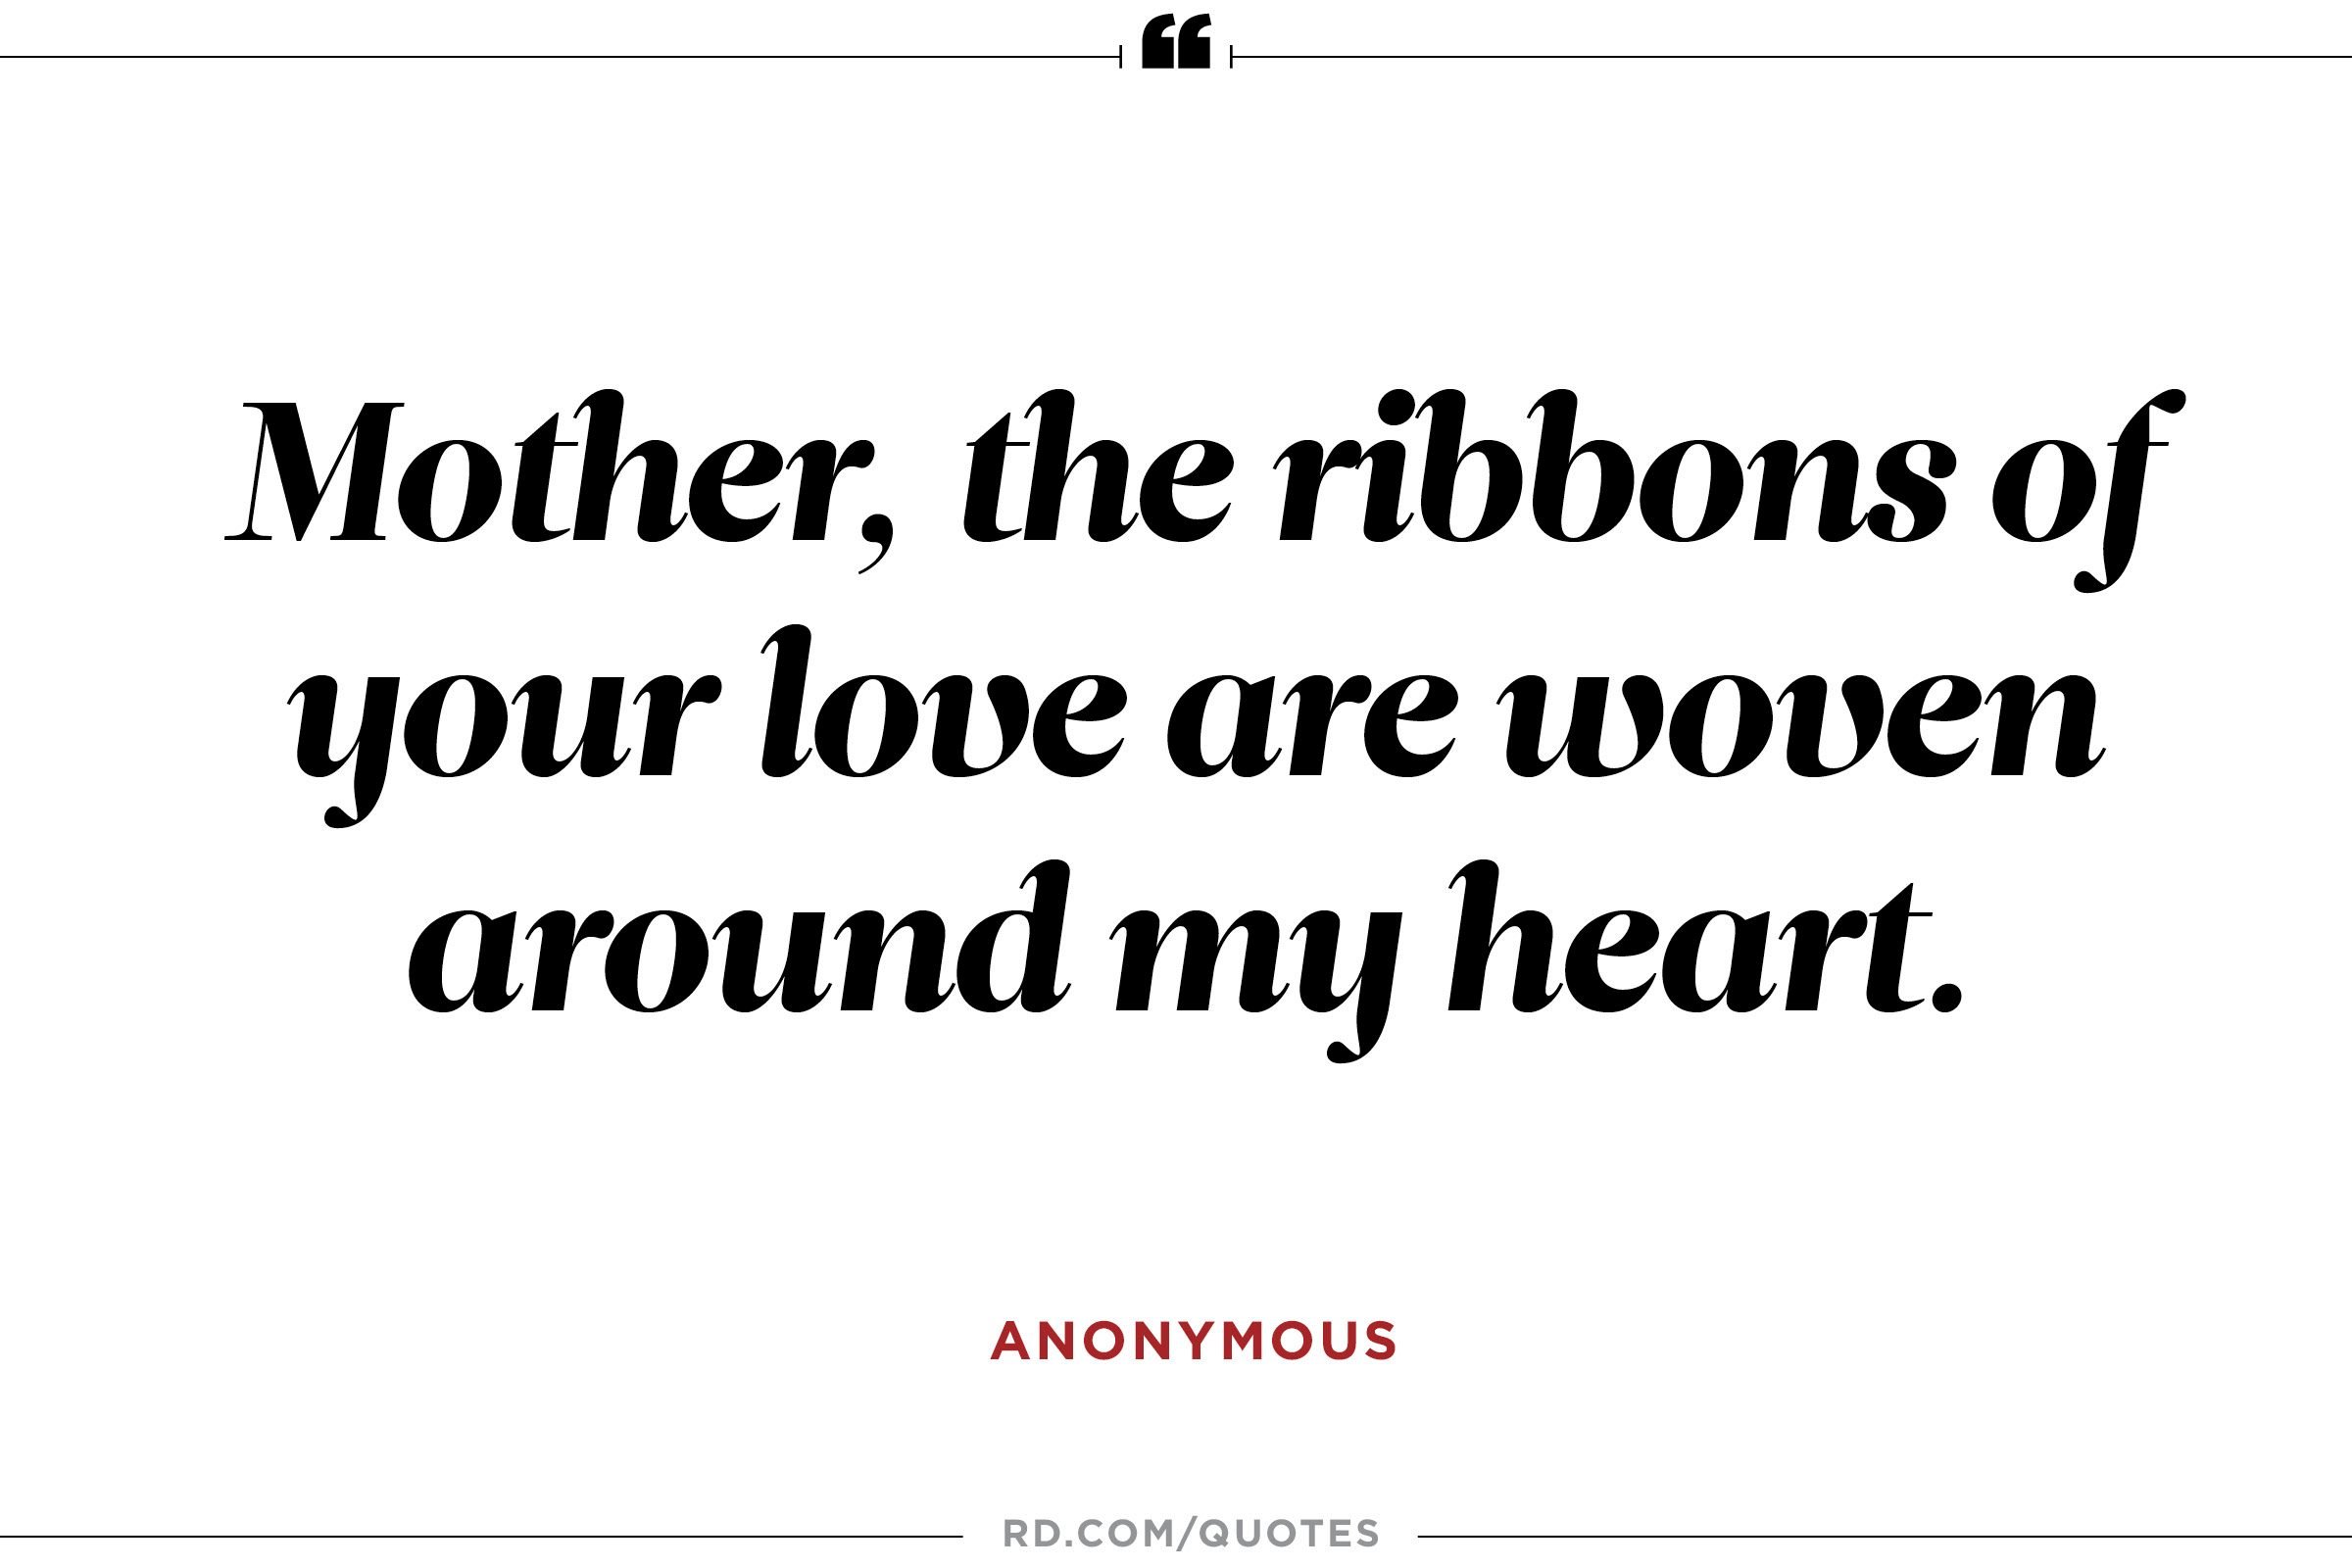 the ribbons of your love are woven around my heart —Anonymous